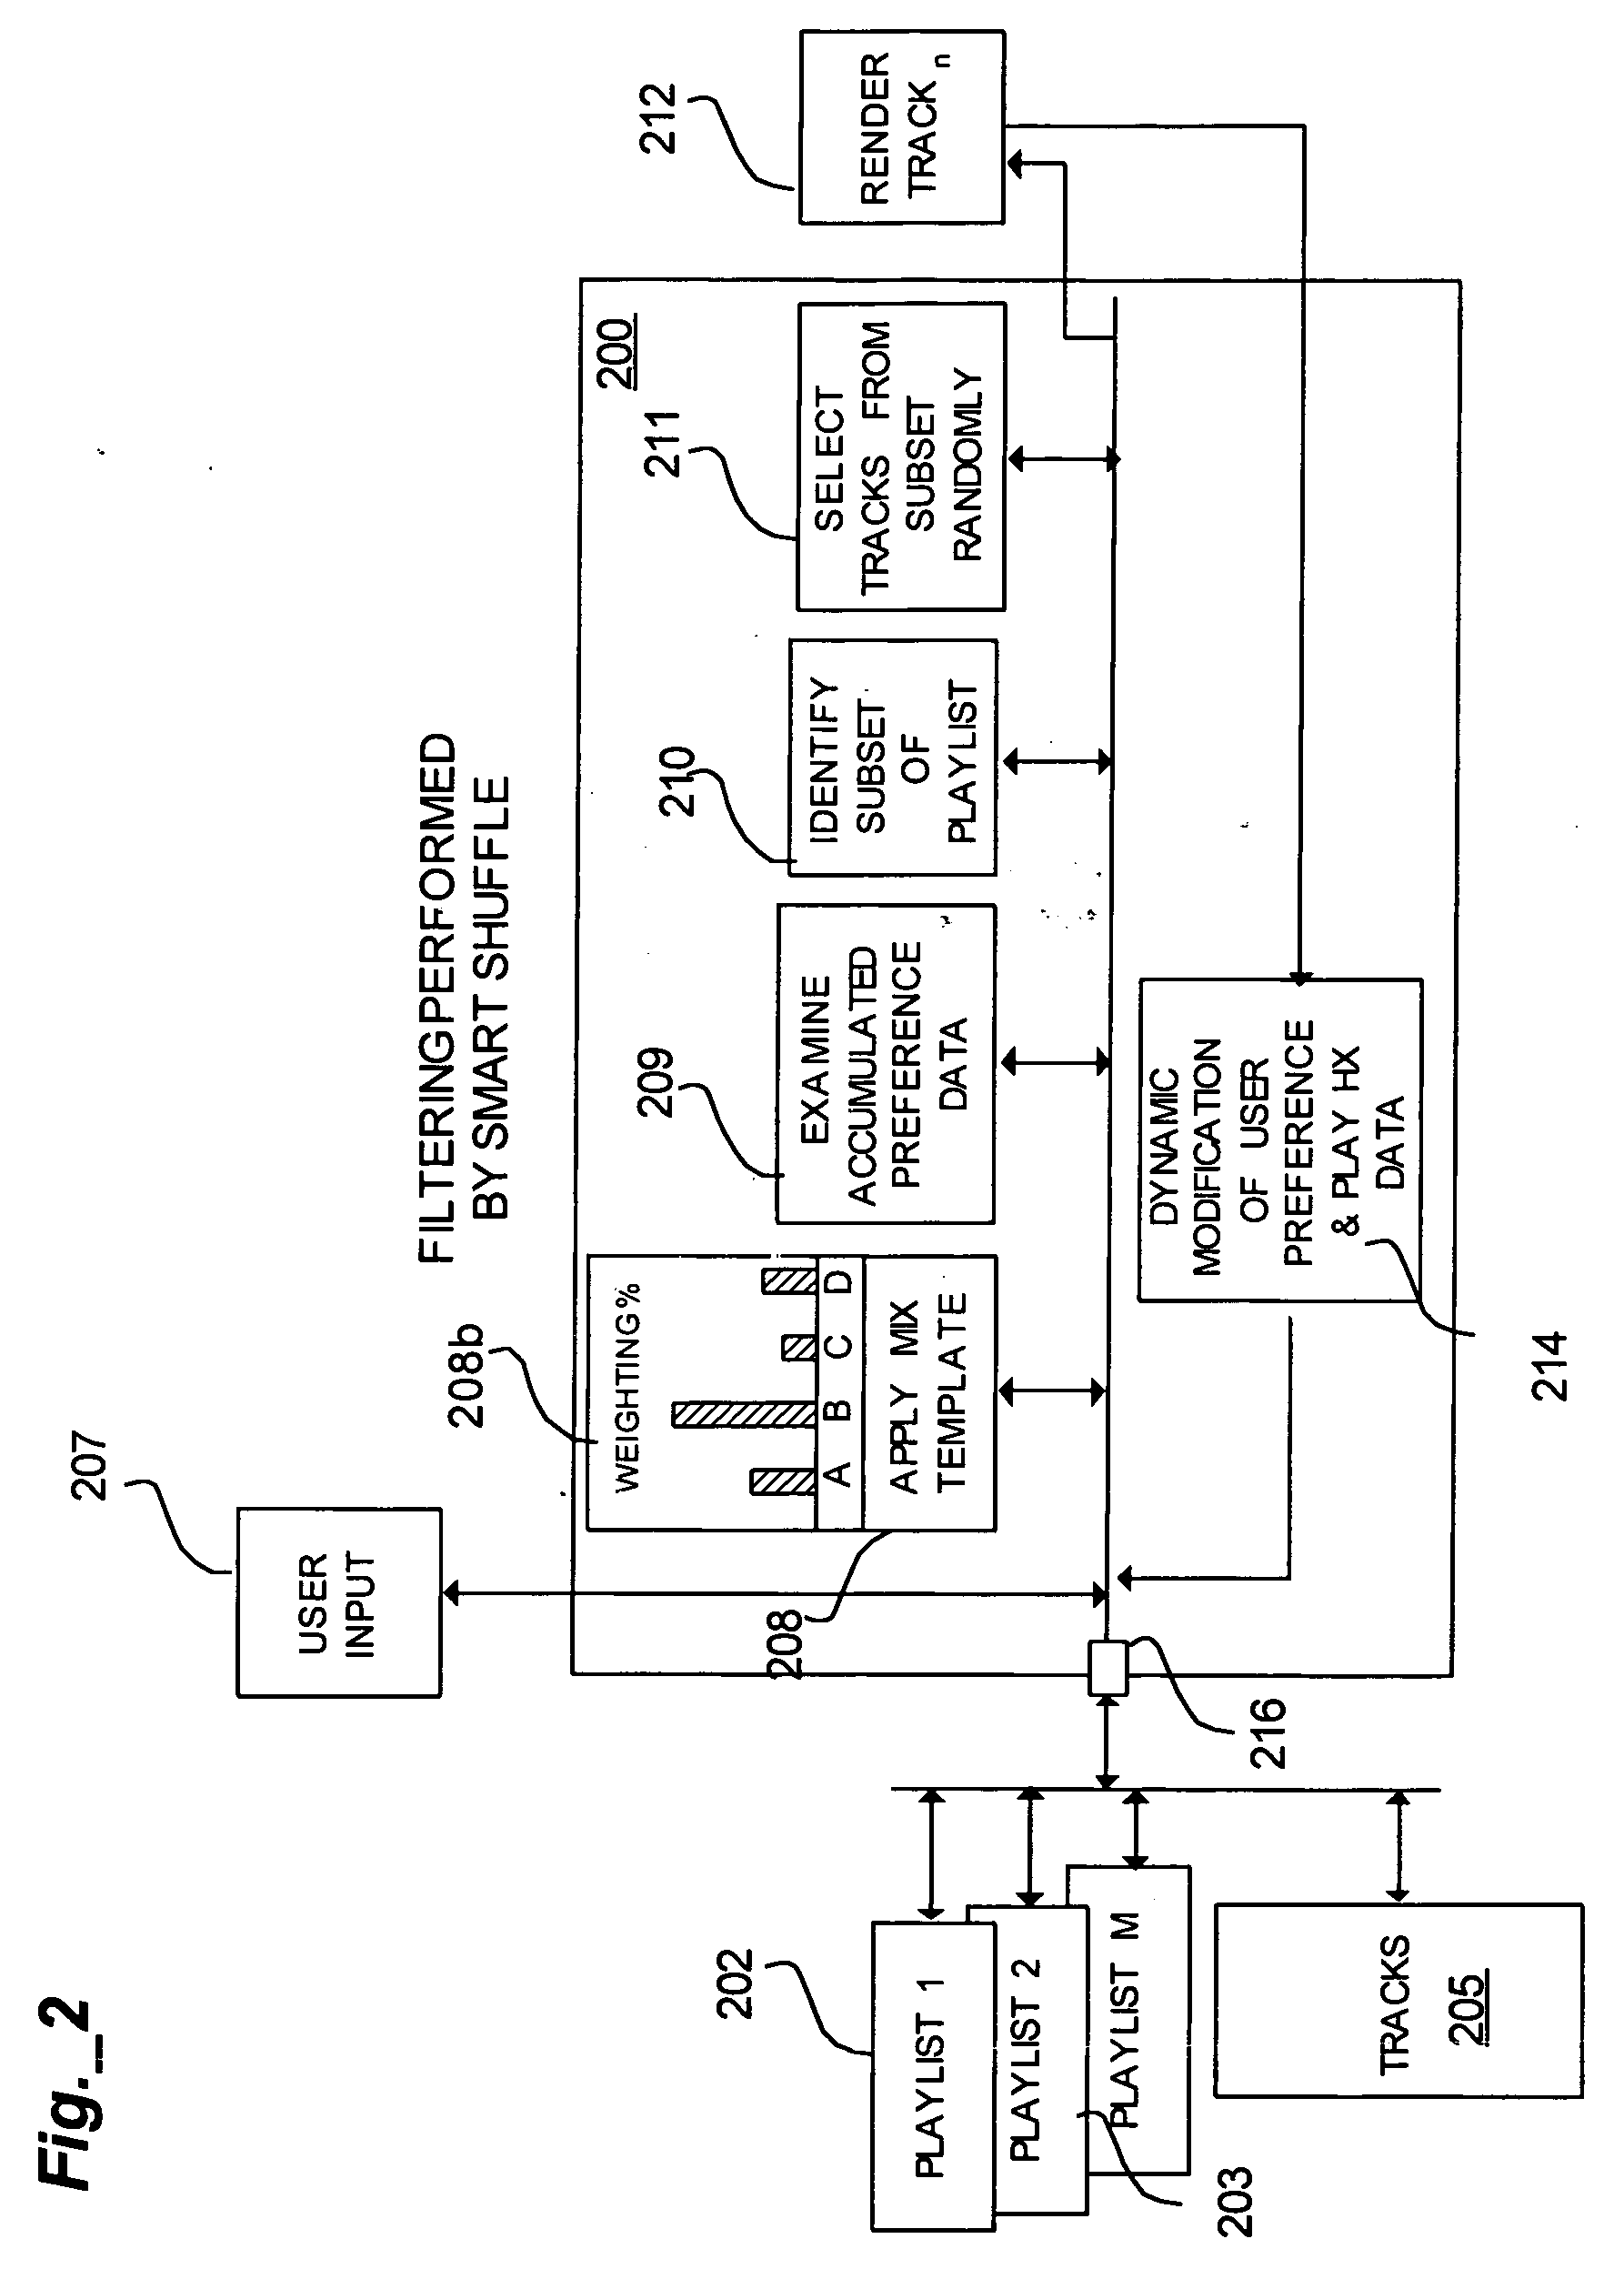 System and method for modifying media content playback based on an intelligent random selection